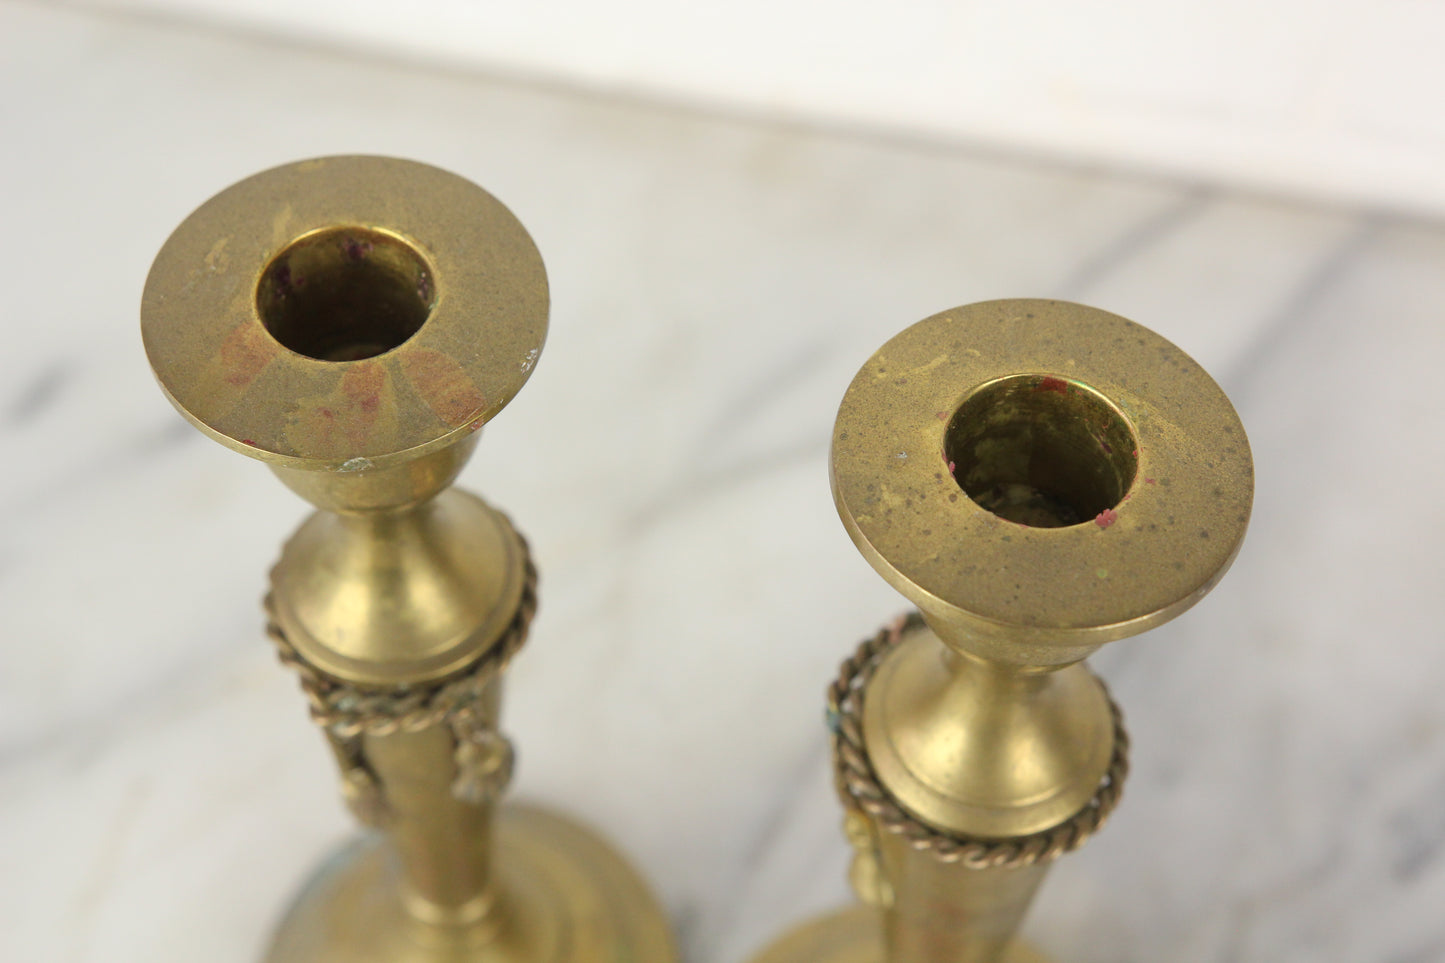 Solid Brass Rope Design Candlesticks, Made in India, Pair - 8.25"